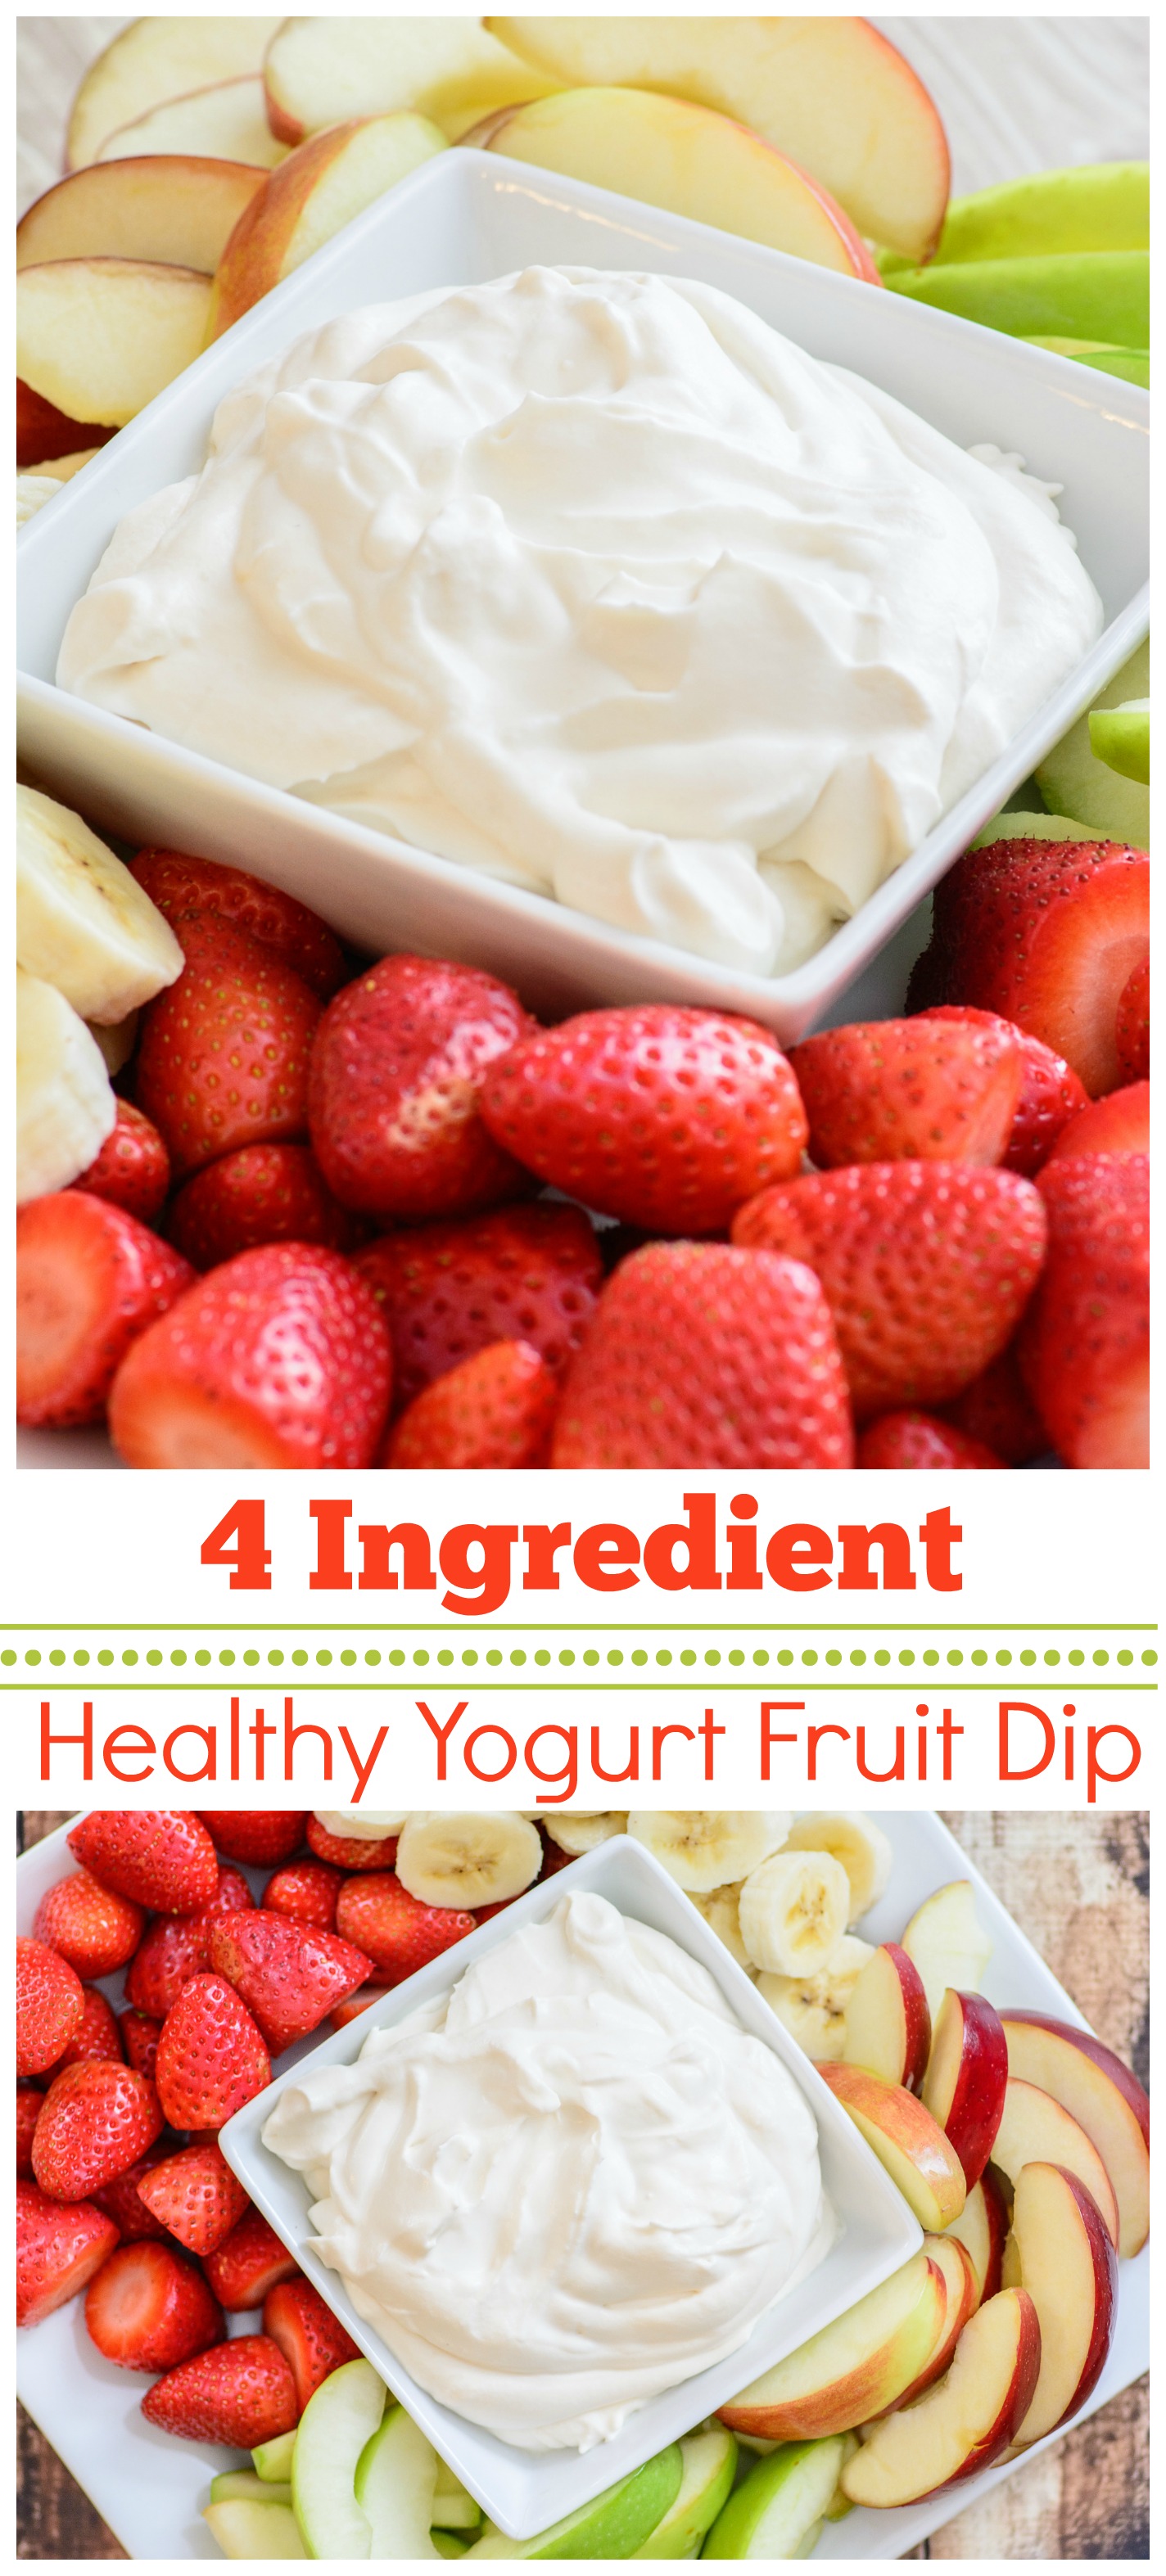 Healthy 4 Ingredient Yogurt Fruit Dip. This healthy and delicious recipe is the perfect compliment to any fruit plate. Made with 3 simple and pure ingredients this fruit dip recipe is sure to be a hit no matter where you serve it!